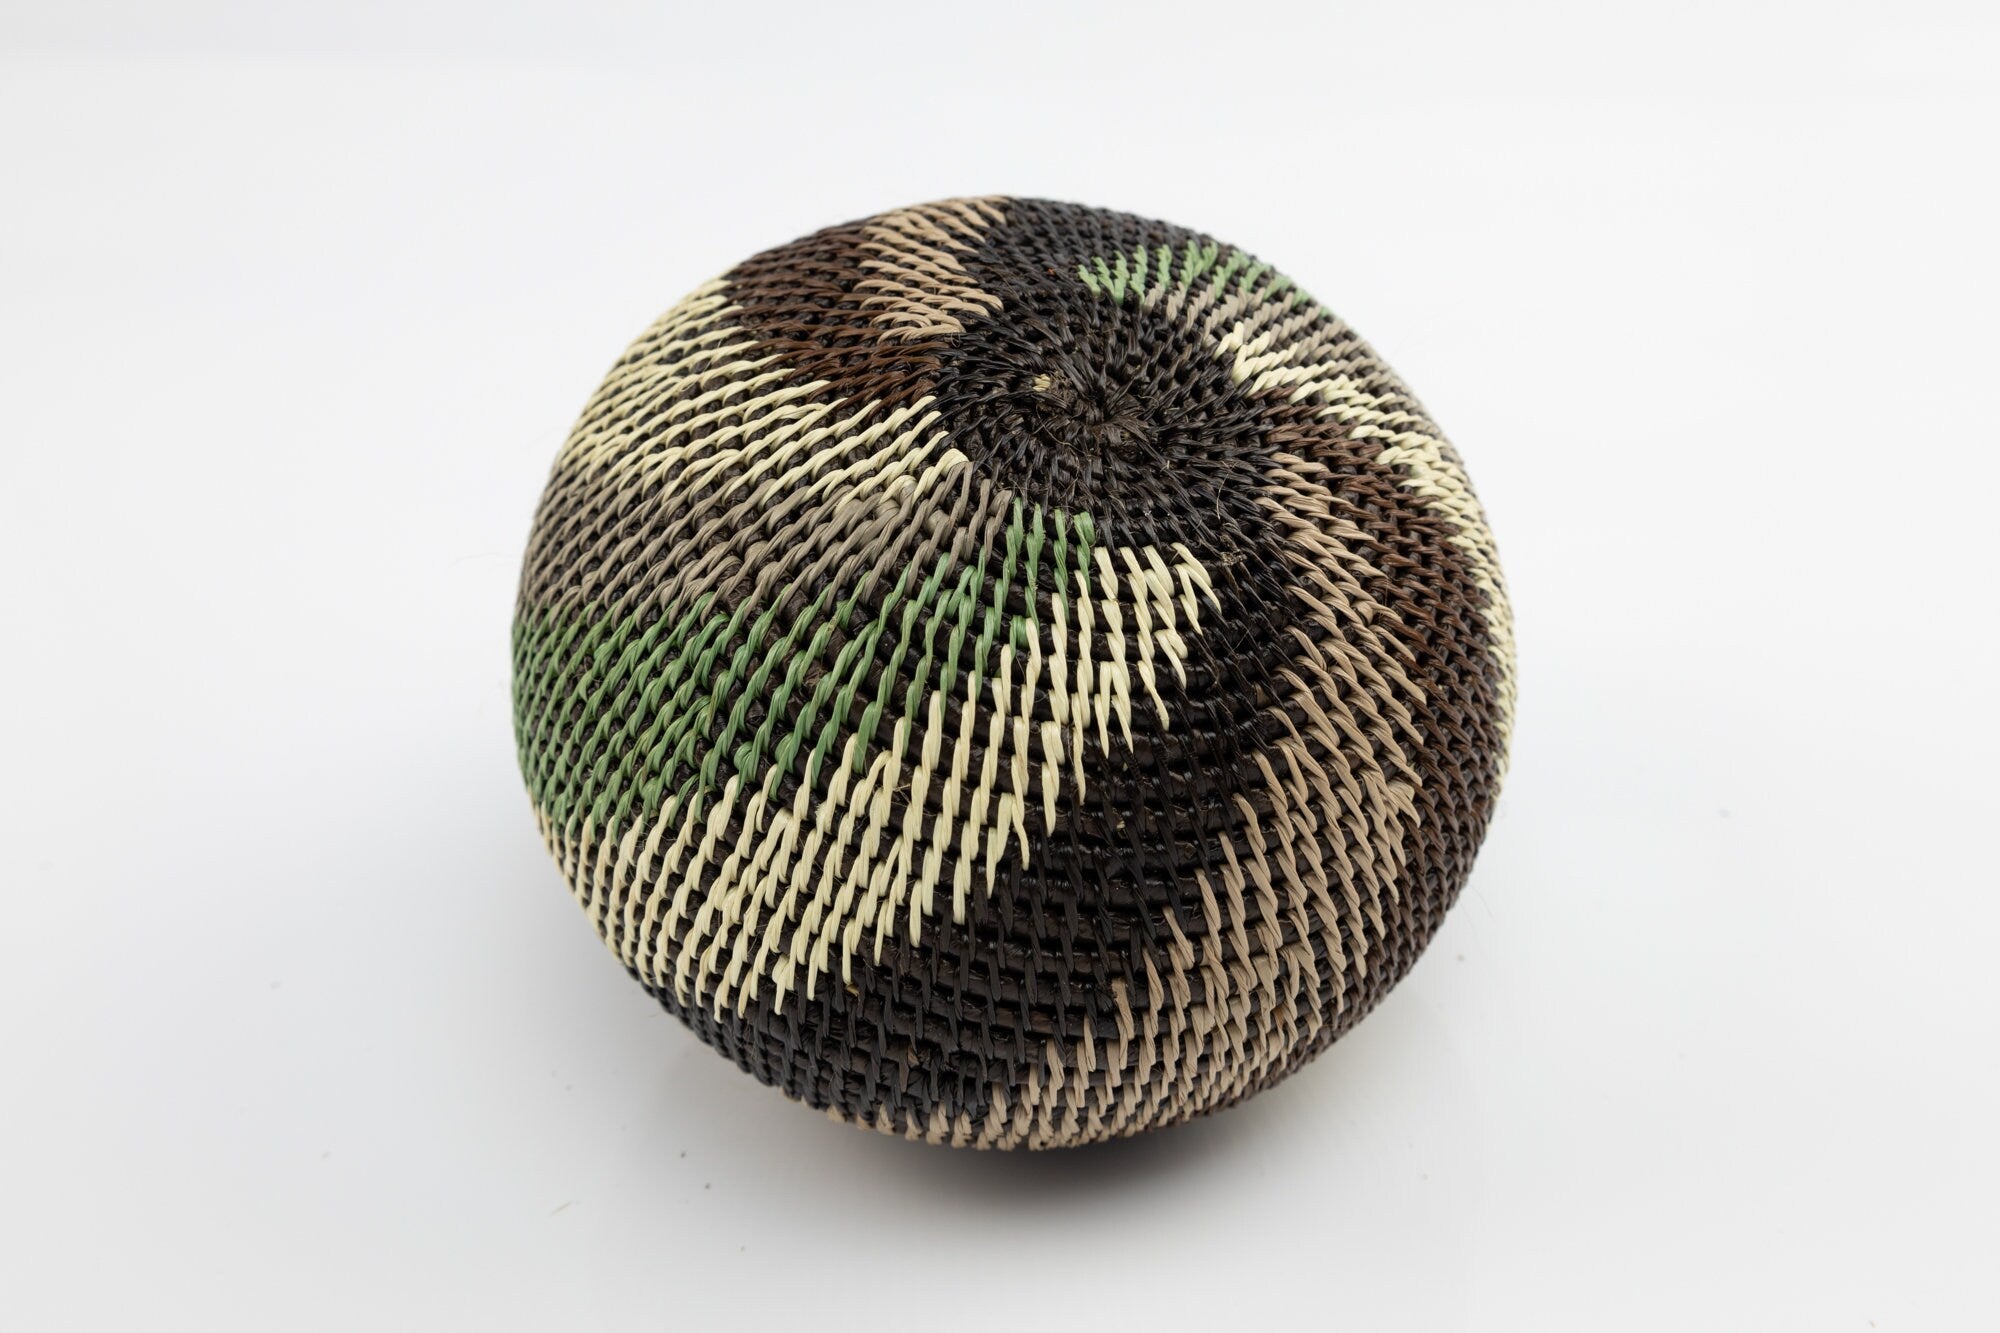 Hand Woven Swirl Design basket with Top Made By Wounaan And Emberá Panama Indians. Bowl Basket, Woven Basket, Basket Decor, Woven Storage